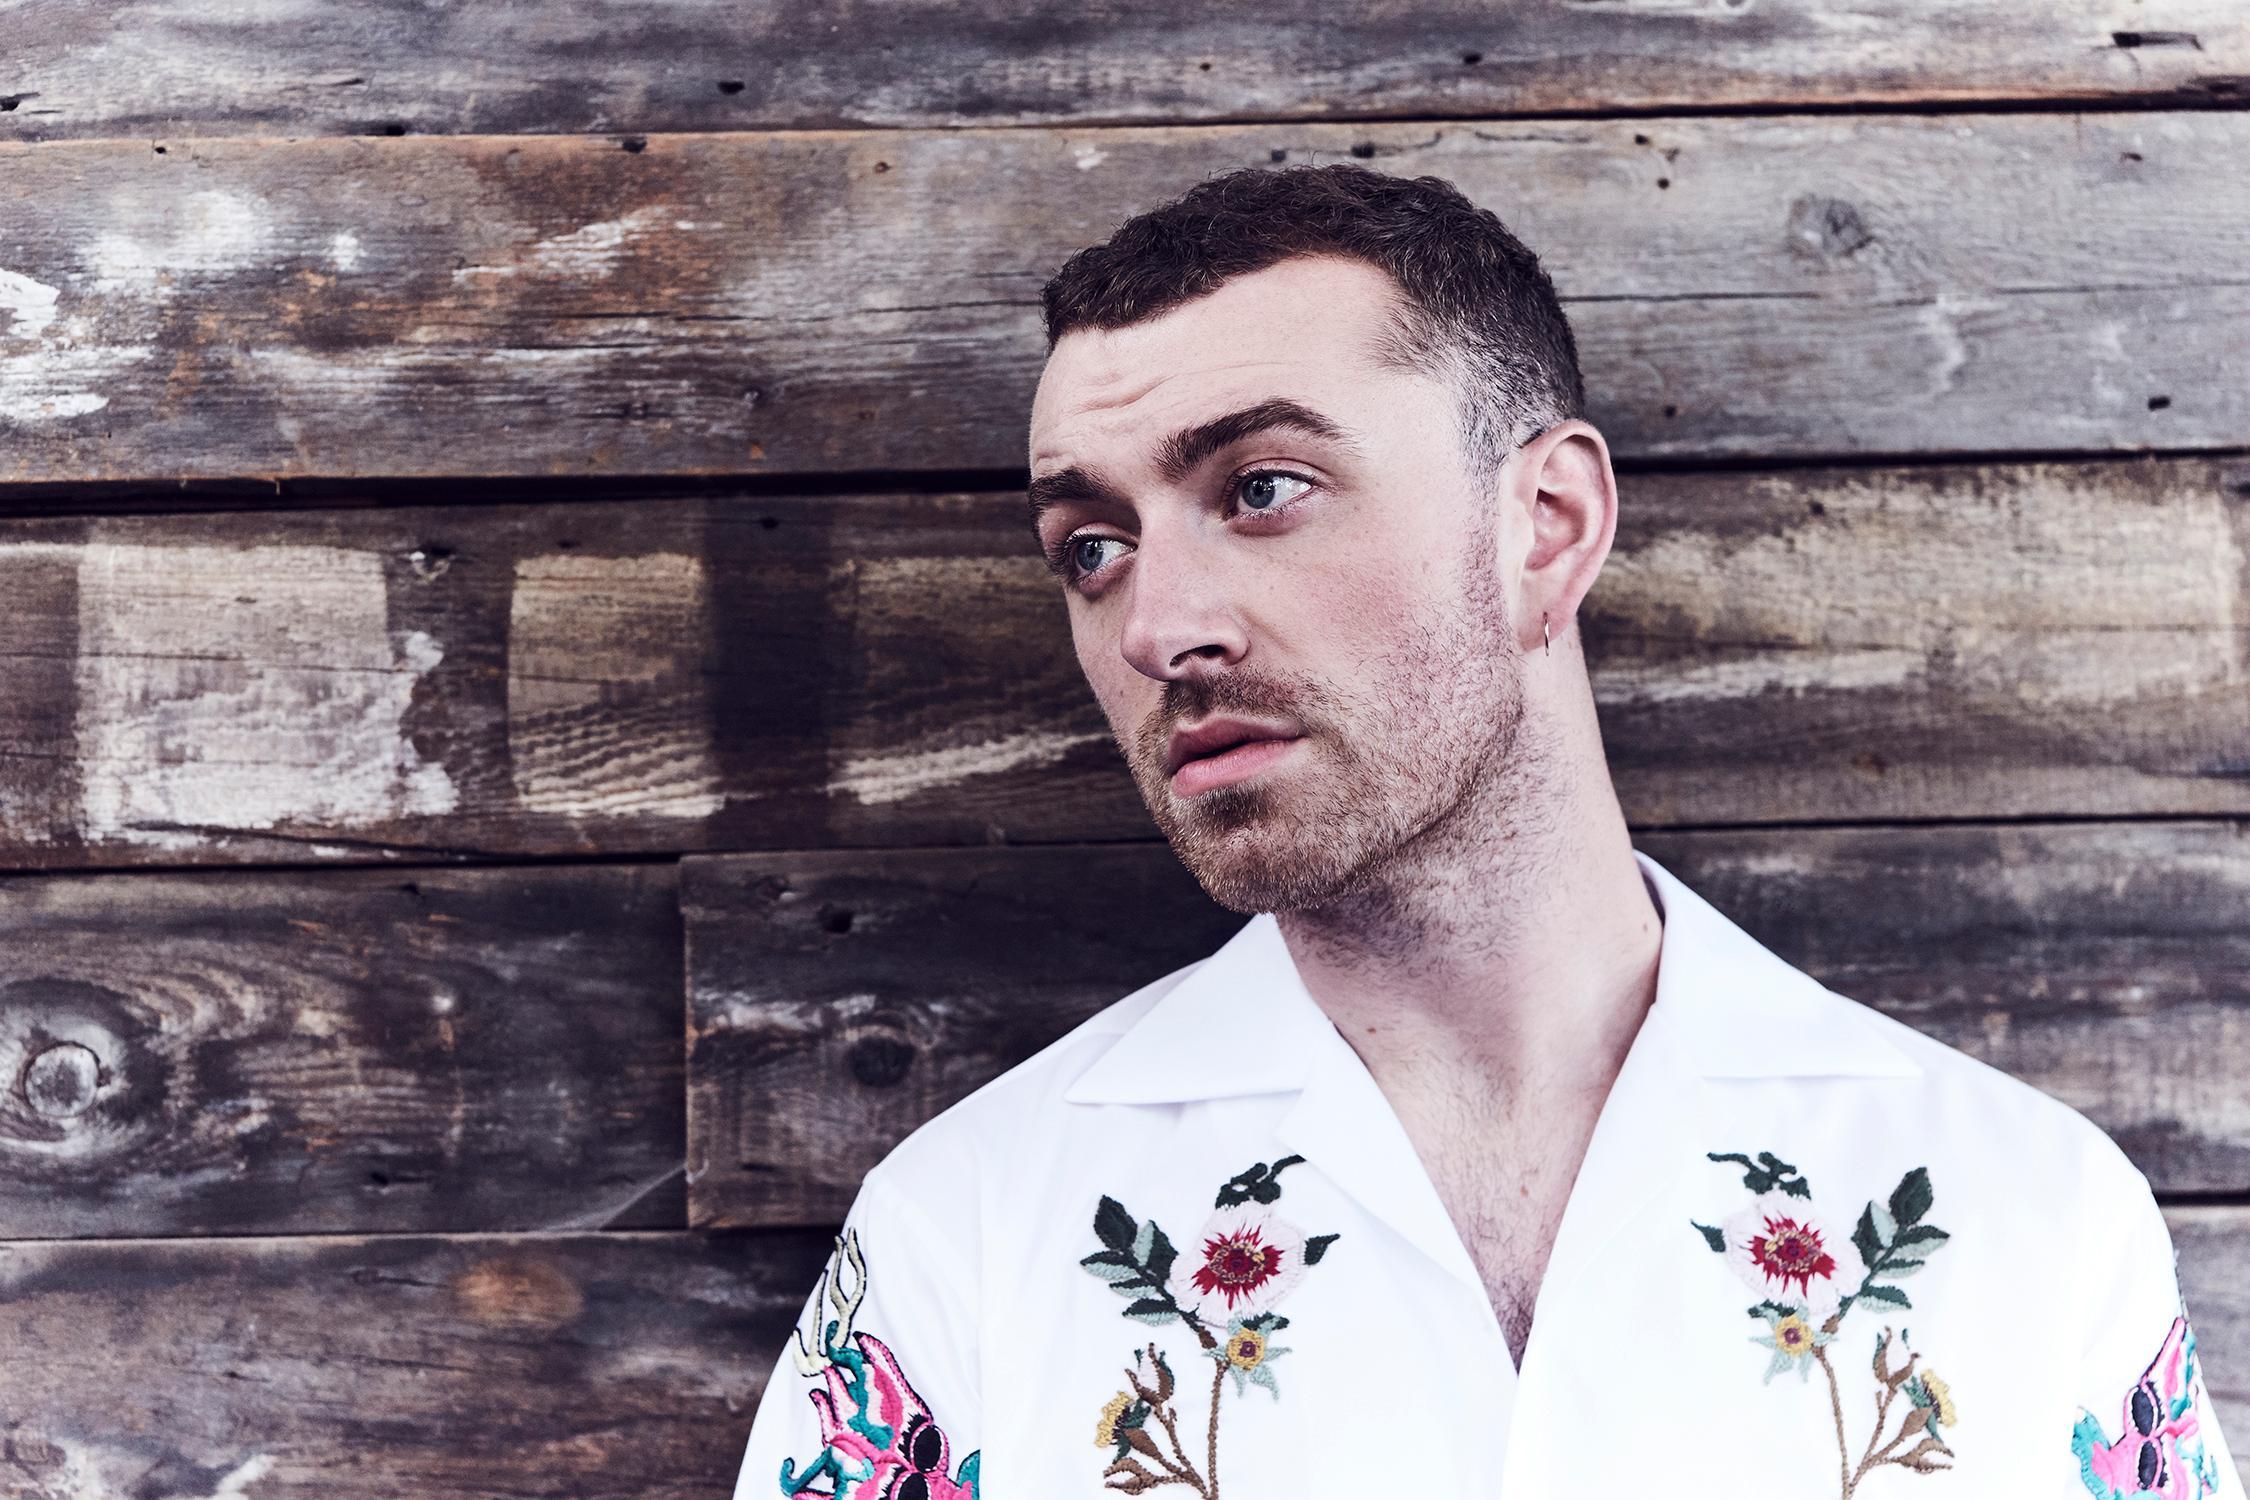 Uncharted: ‘One Last Song’ is far from the end for Sam Smith